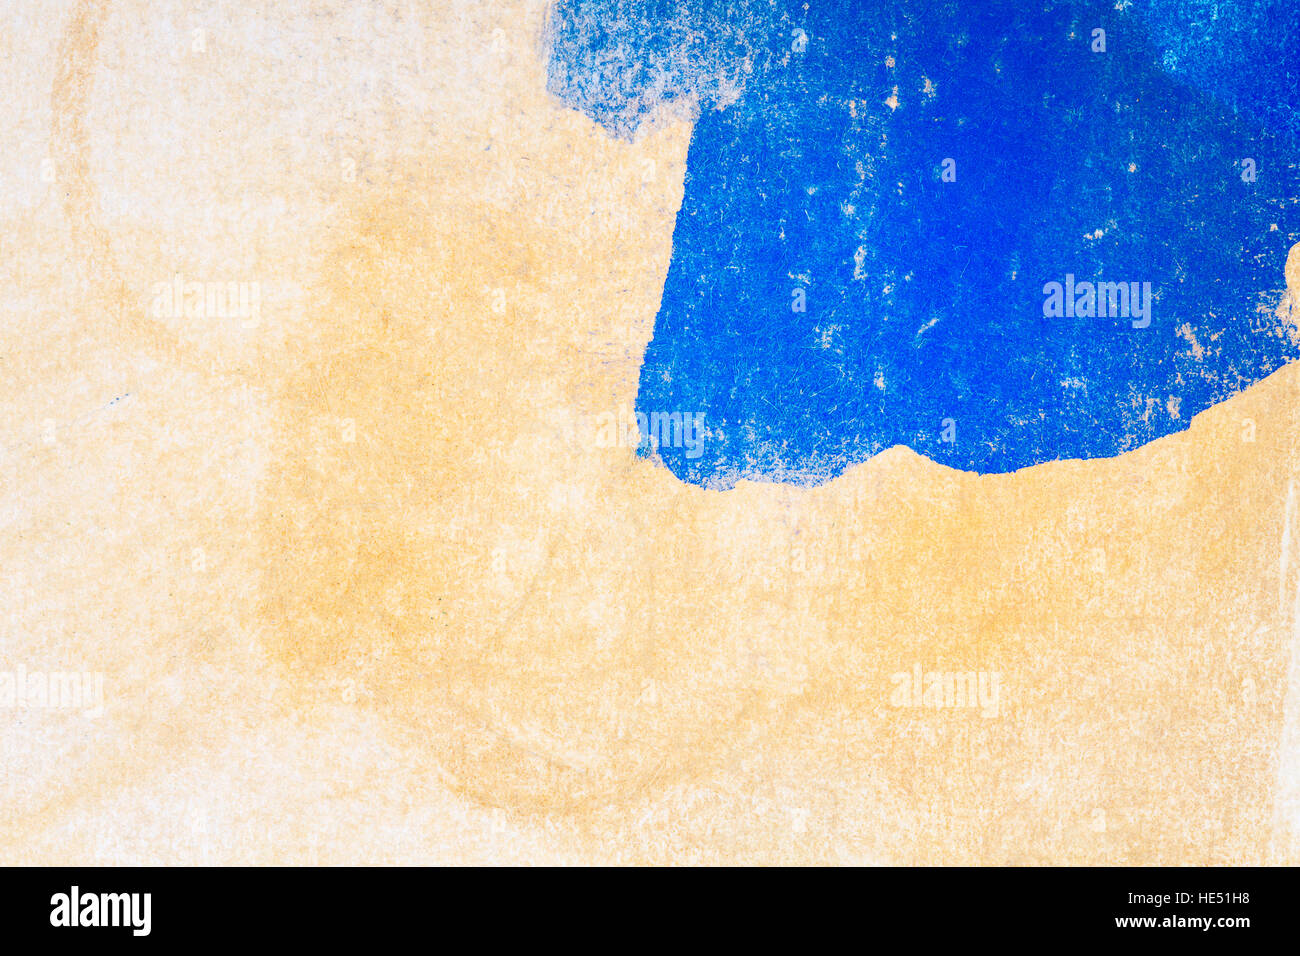 Macro shot of abstract hand drawn blue and brown watercolor paints background Stock Photo